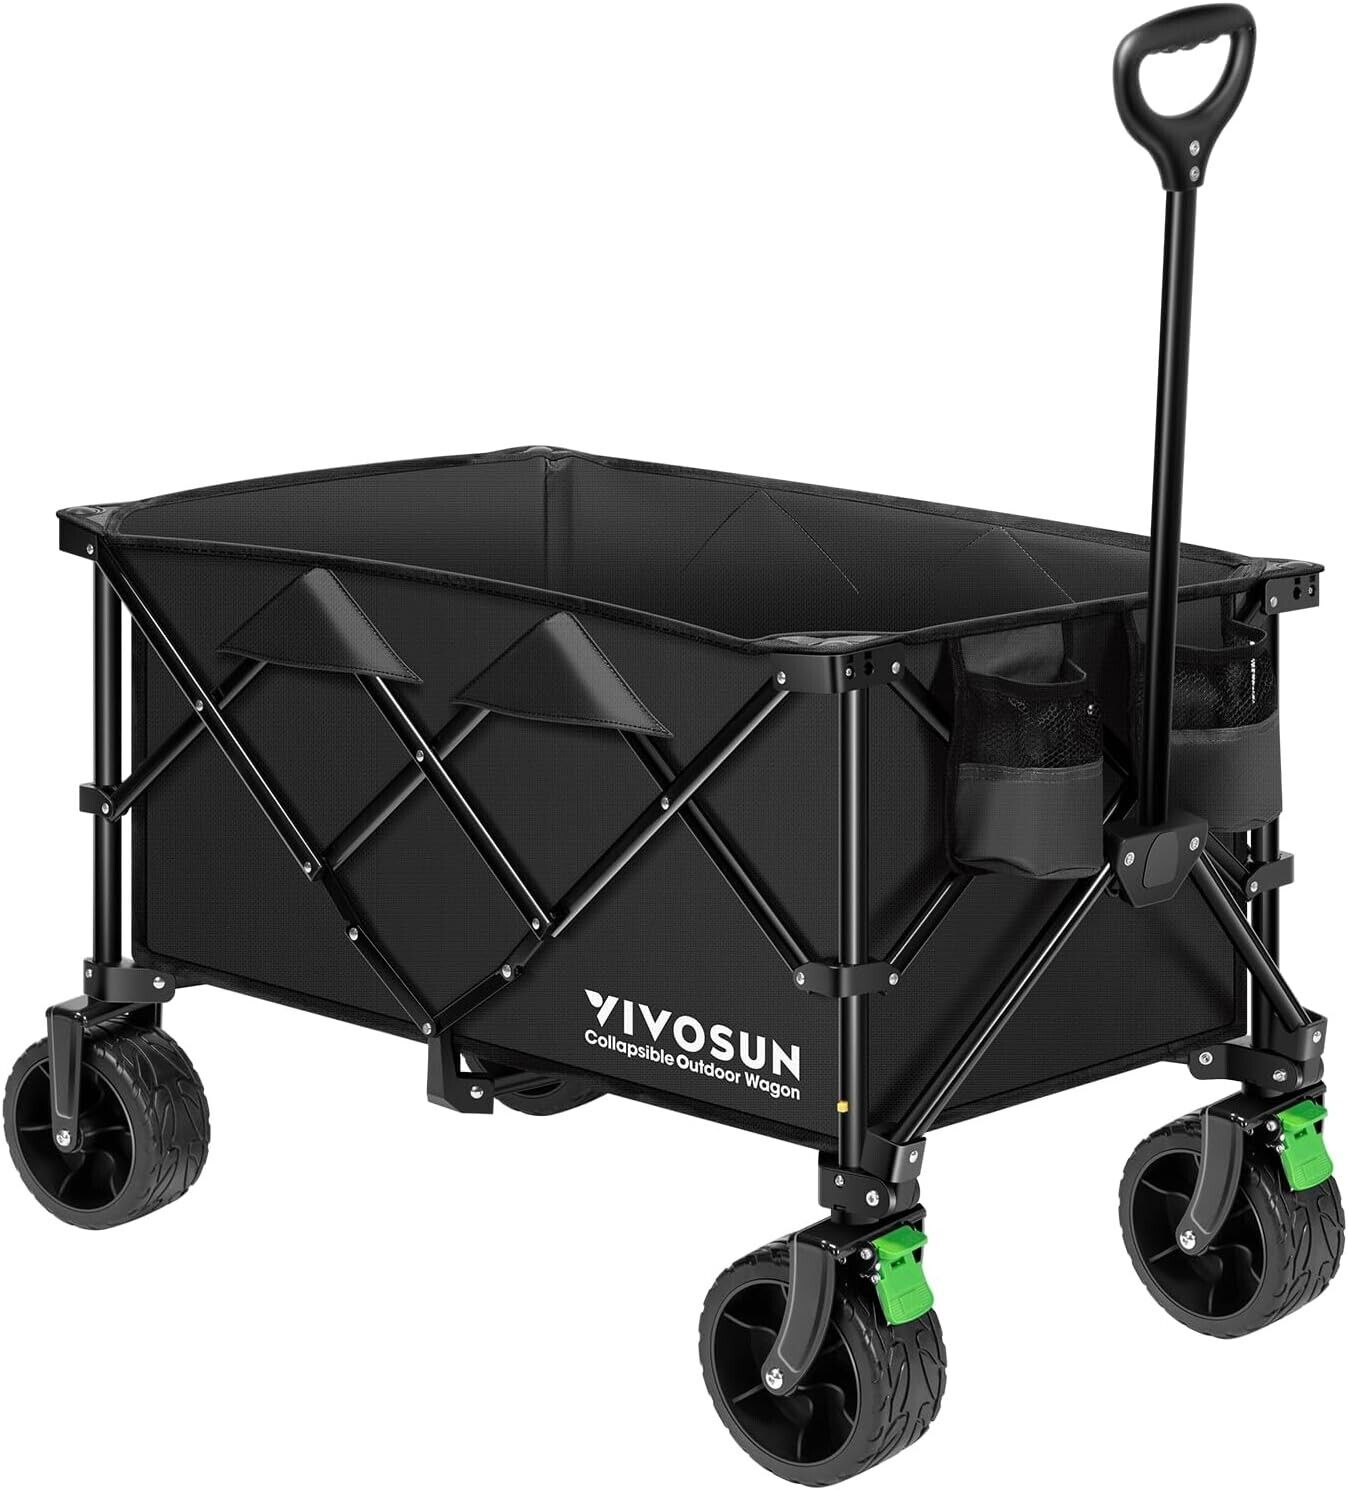 Heavy Duty Collapsible Folding Wagon Cart,Max Load 220L,360° Rotaing,Anti Skid